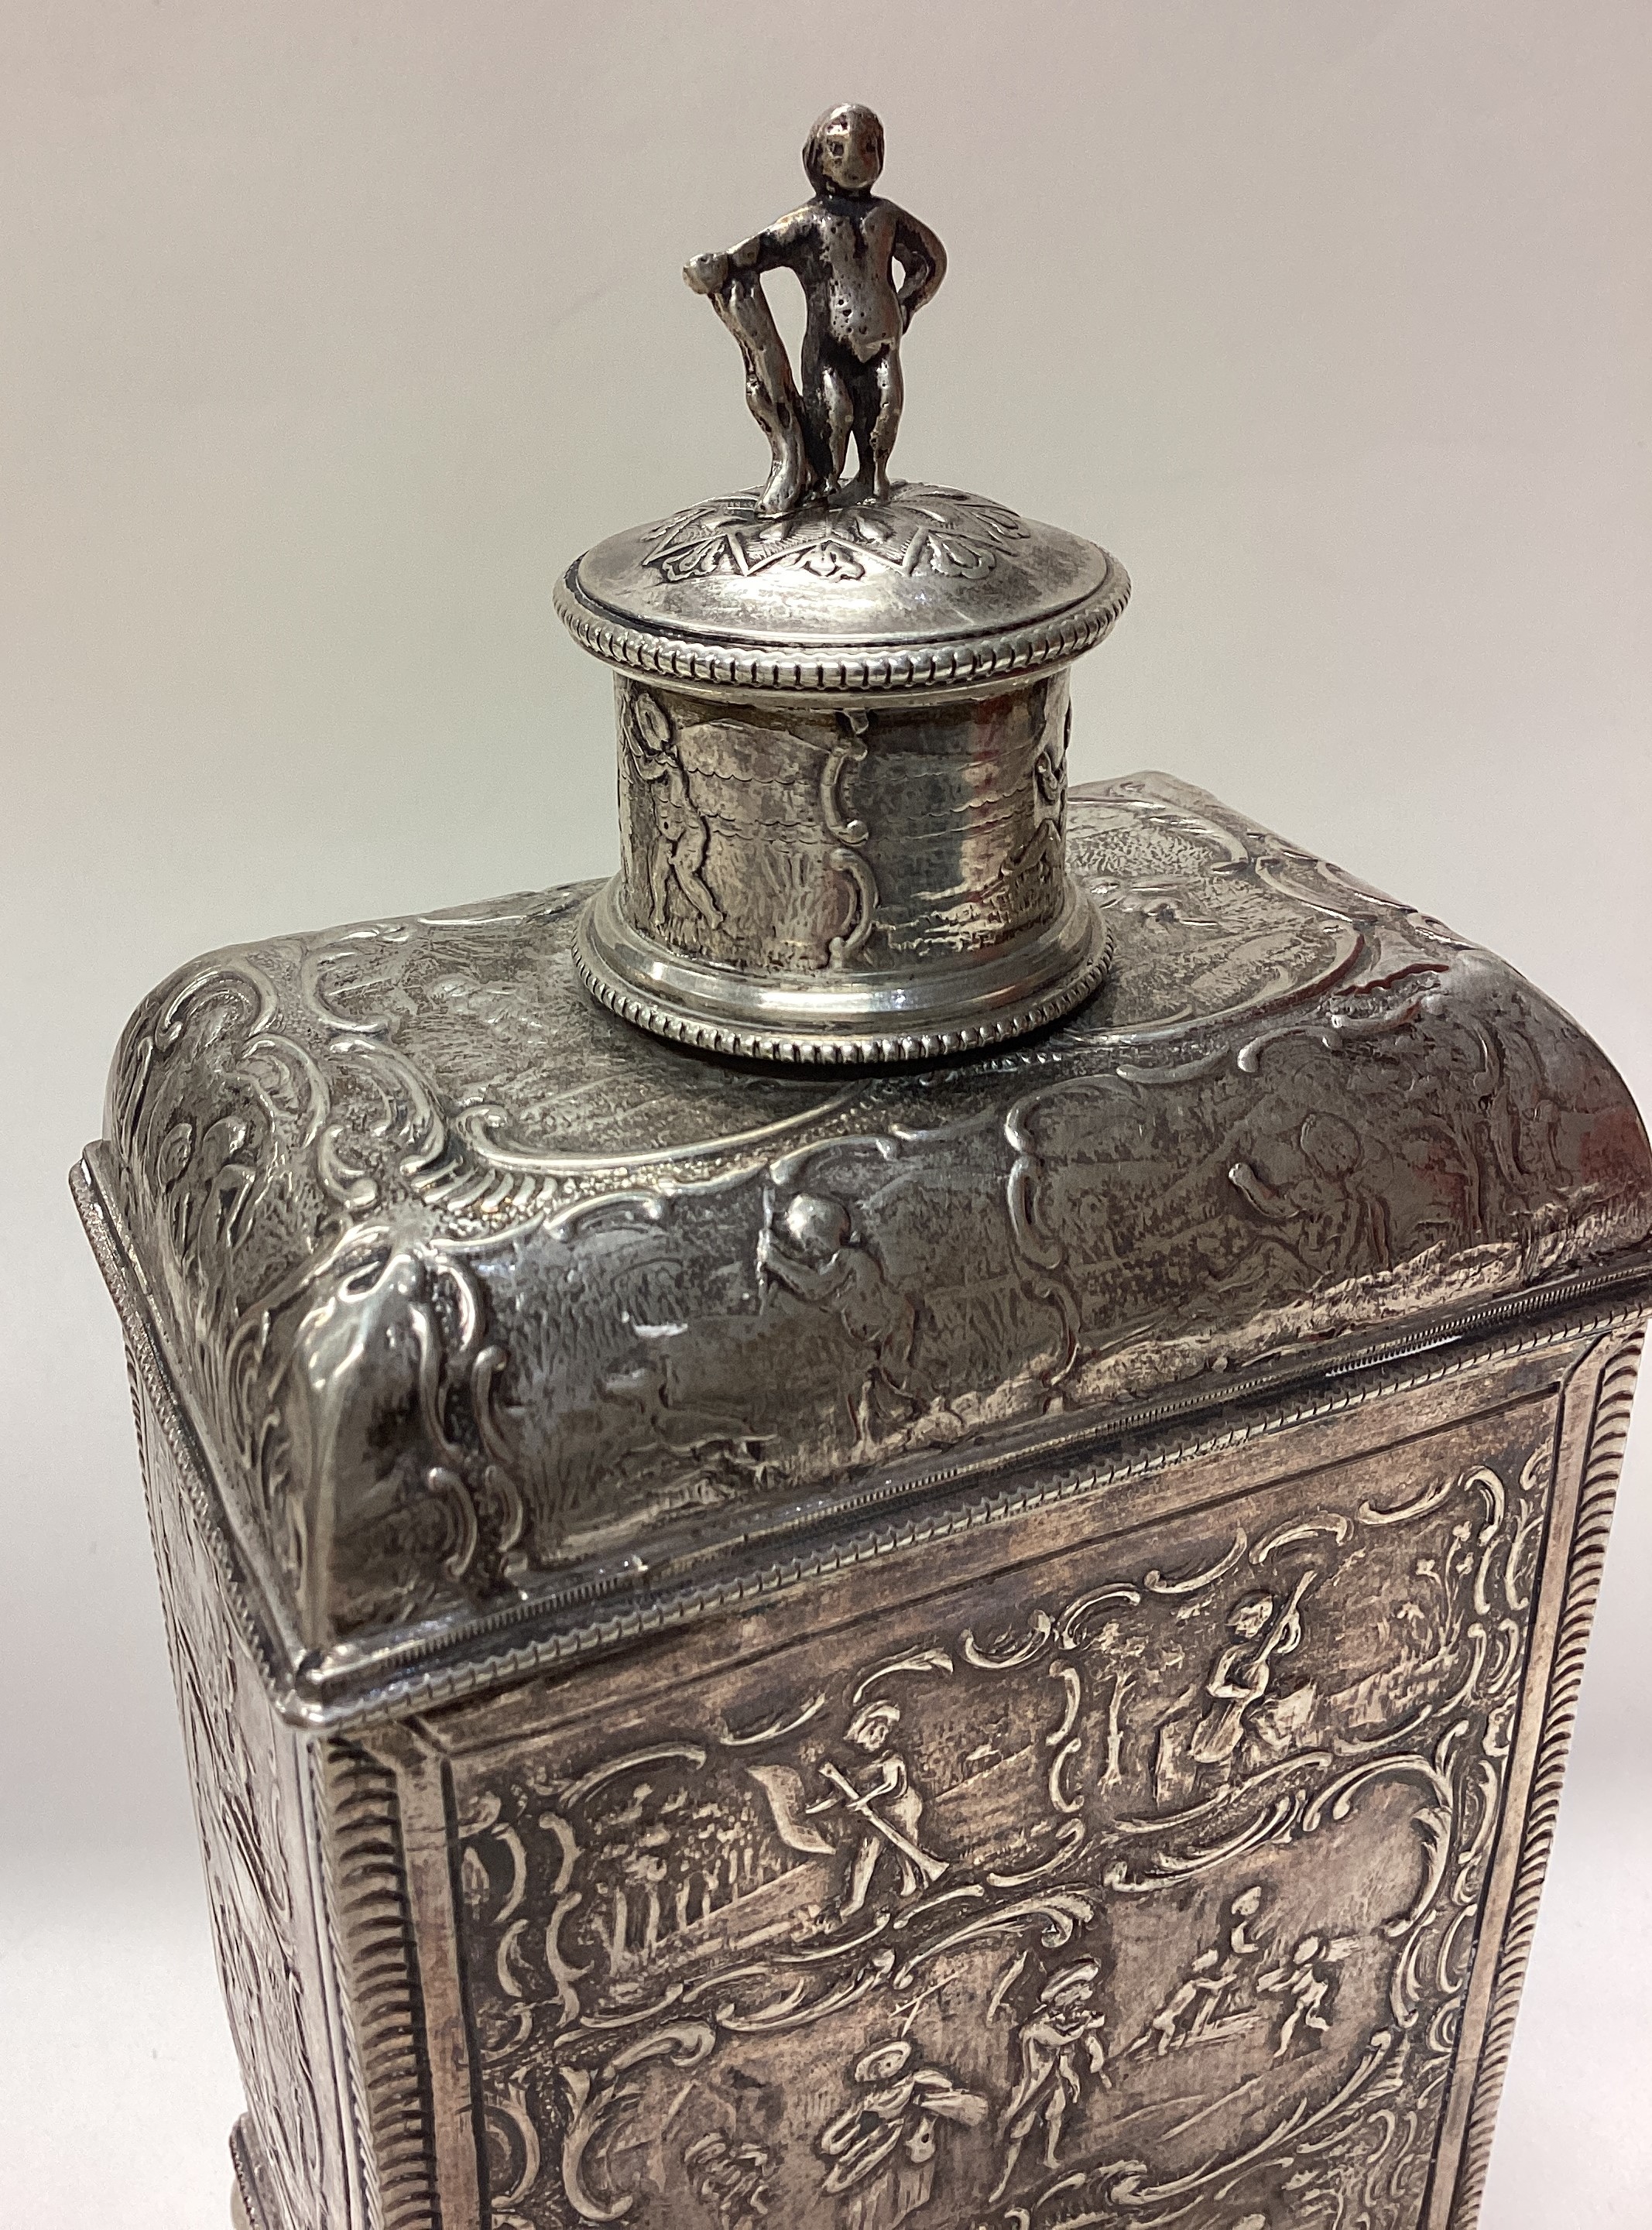 A 19th Century Dutch silver tea caddy with embossed decoration. - Image 2 of 4